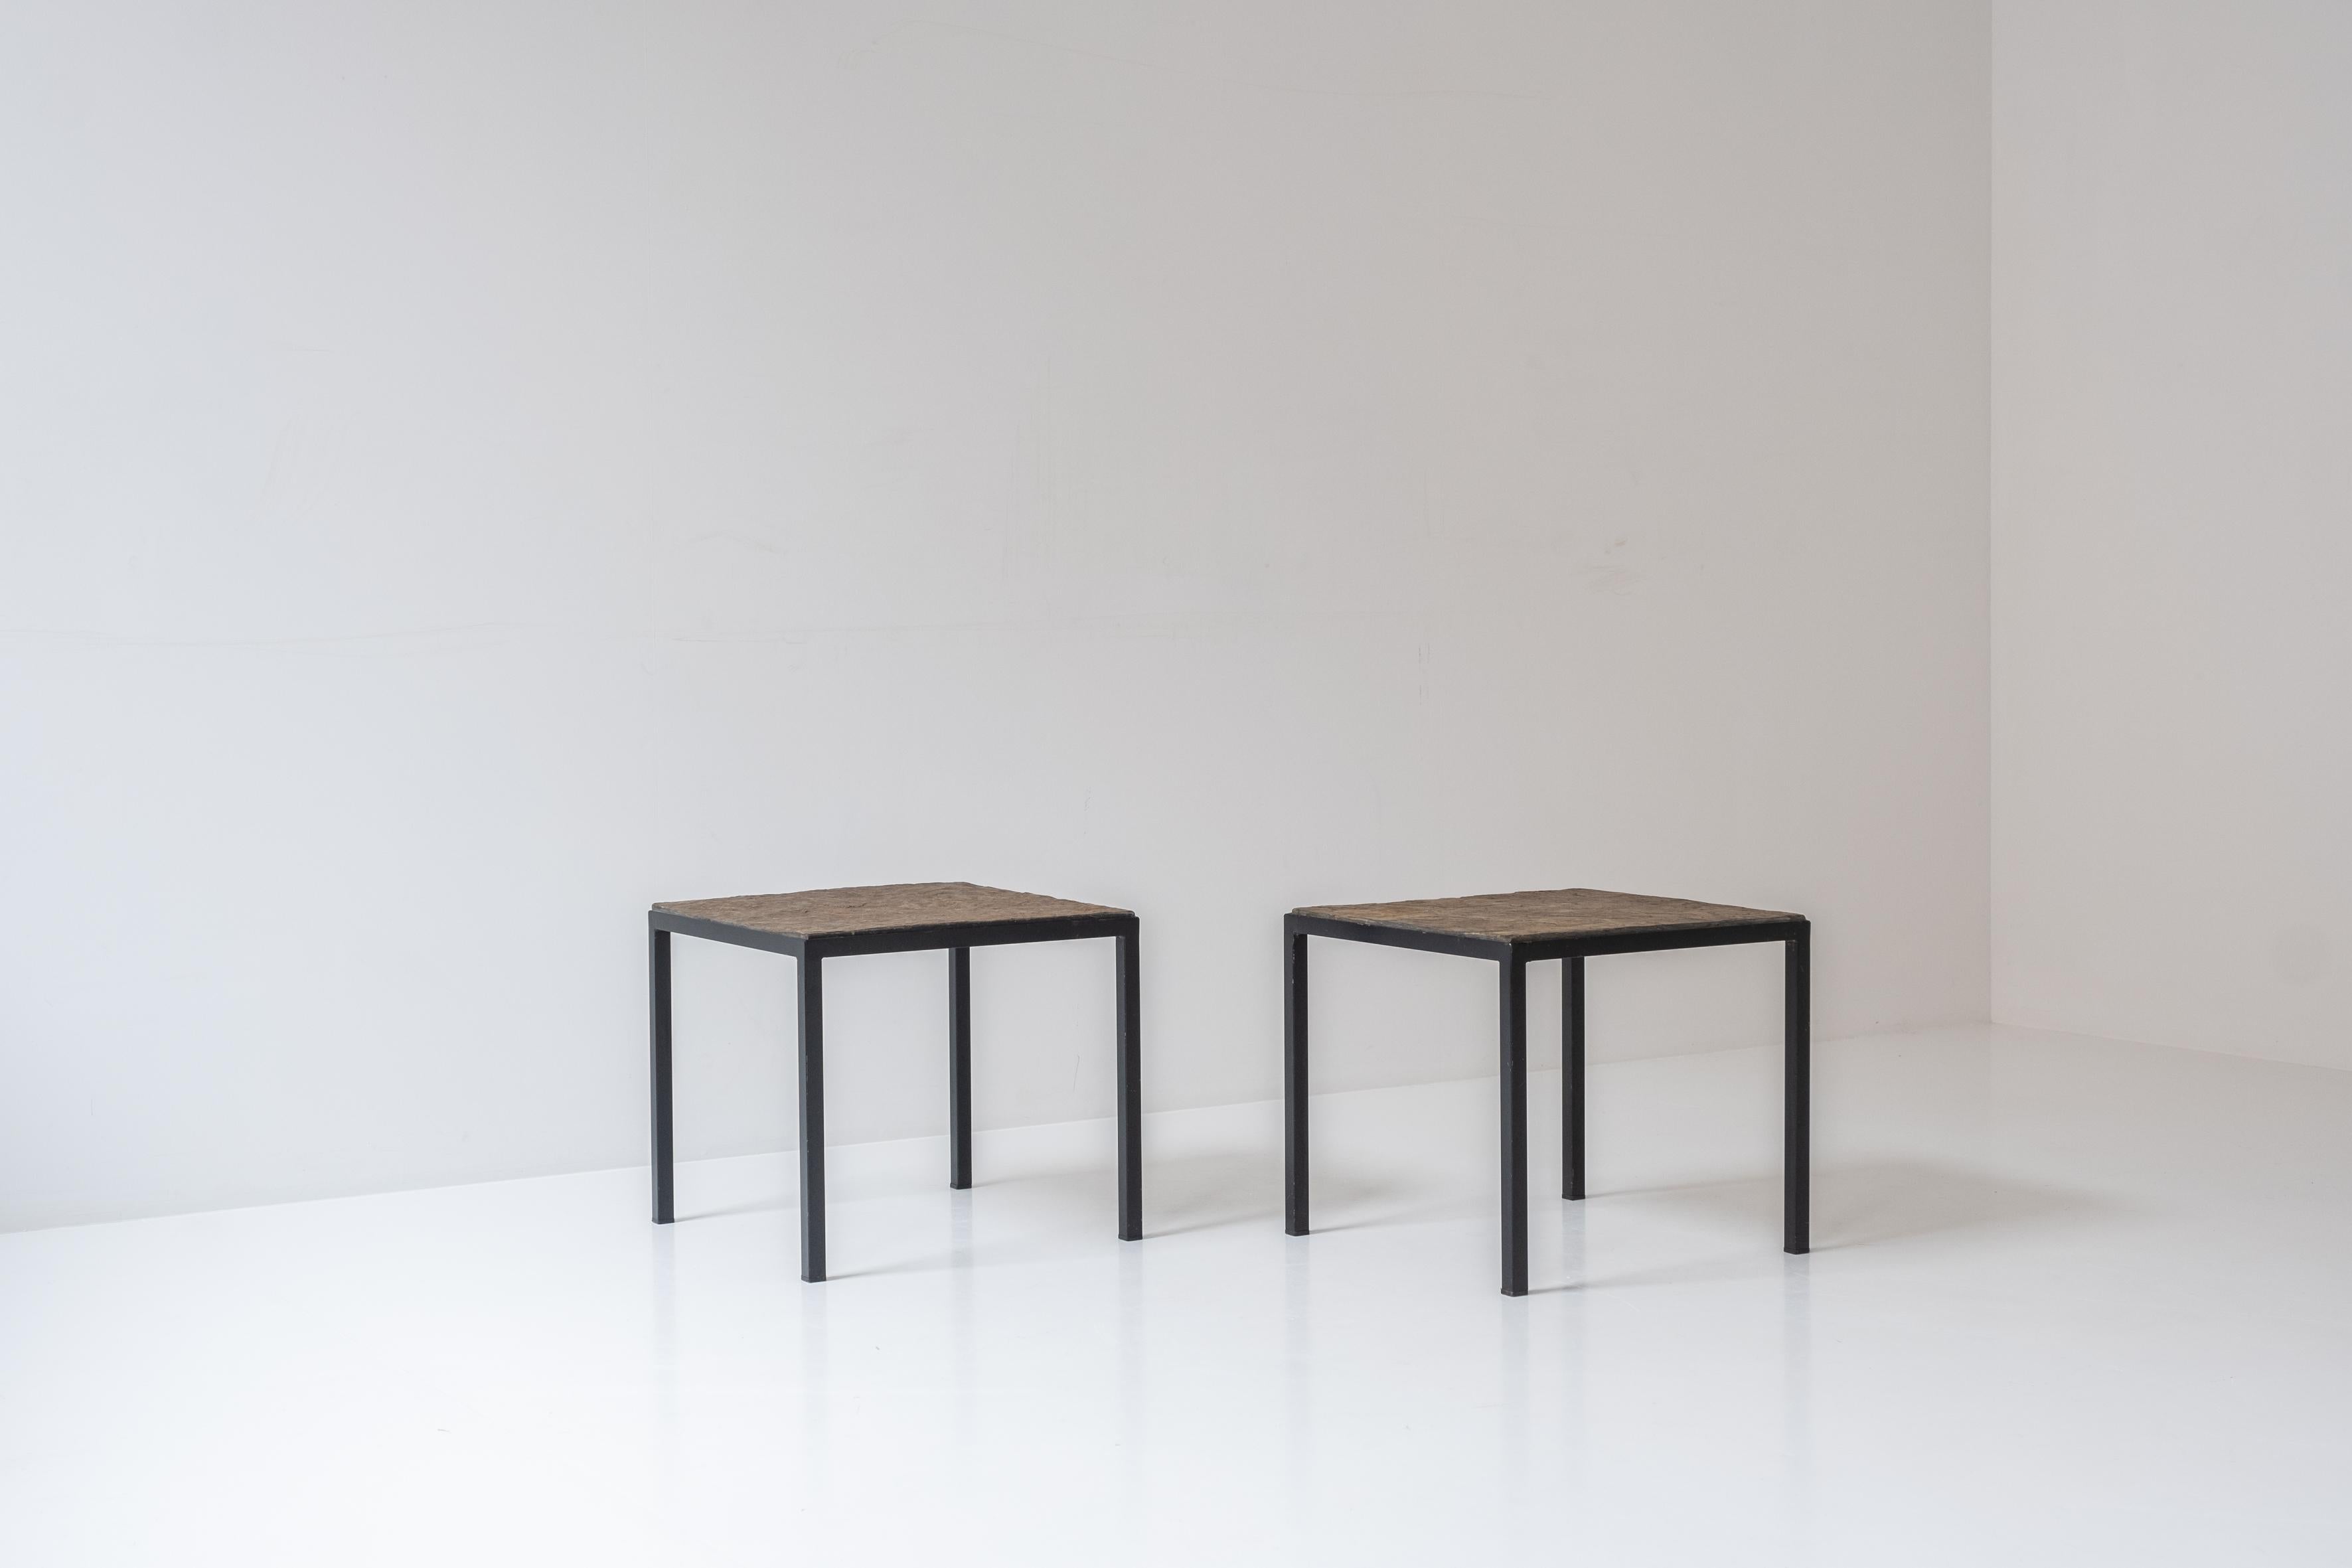 Set of 2 identical square slate stone coffee table from the 1950’s. These elegant coffee tables features black steel frames and slate stone tops. Both presented in its original condition with nice variations on the slate stone giving its a very